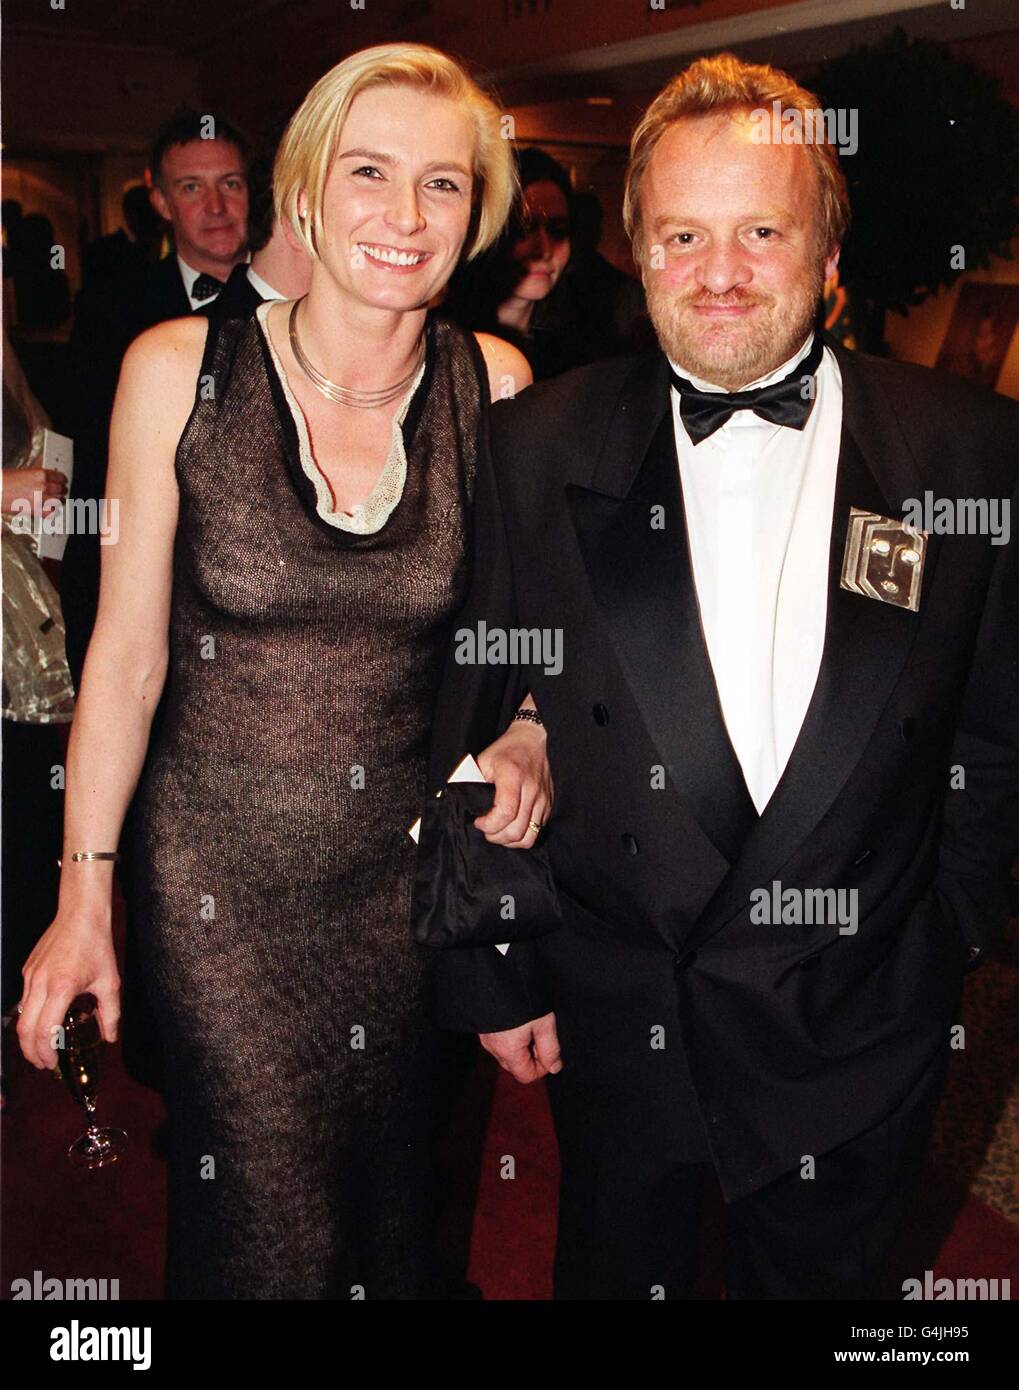 Celebrity chef Anthony Worrell Thompson, accompanied by his wife, arrive at Grosvener House Hotel for the the Carlton london Restaurant Awards. Stock Photo